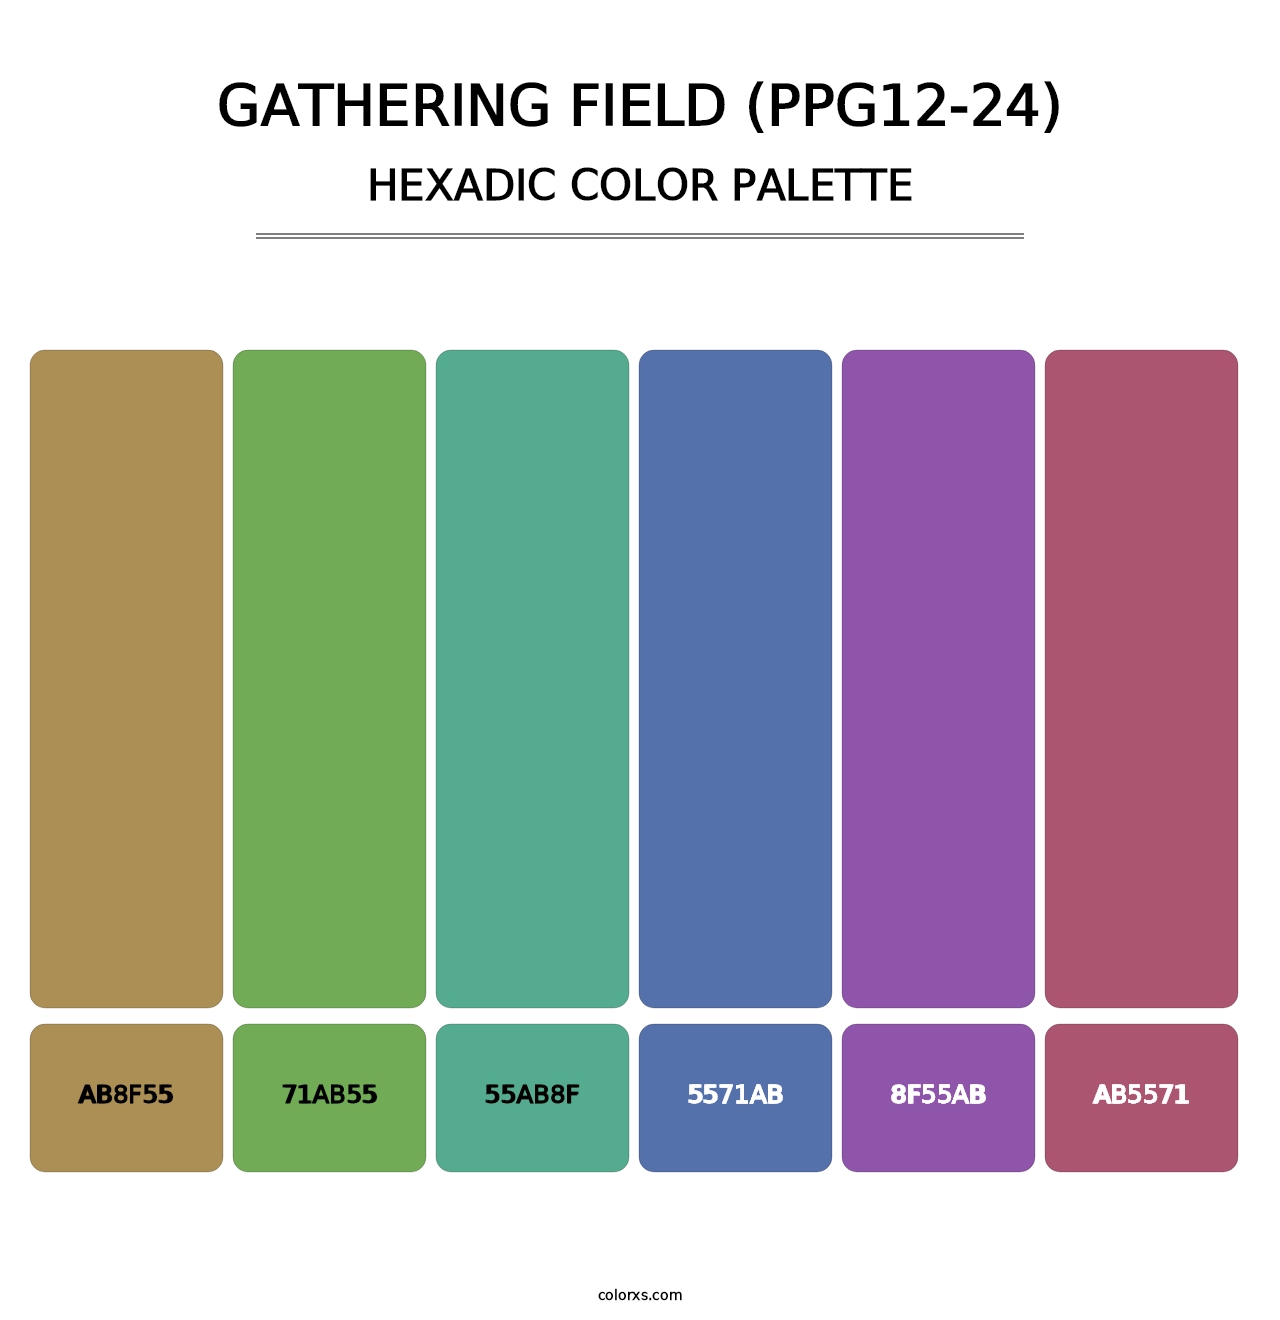 Gathering Field (PPG12-24) - Hexadic Color Palette